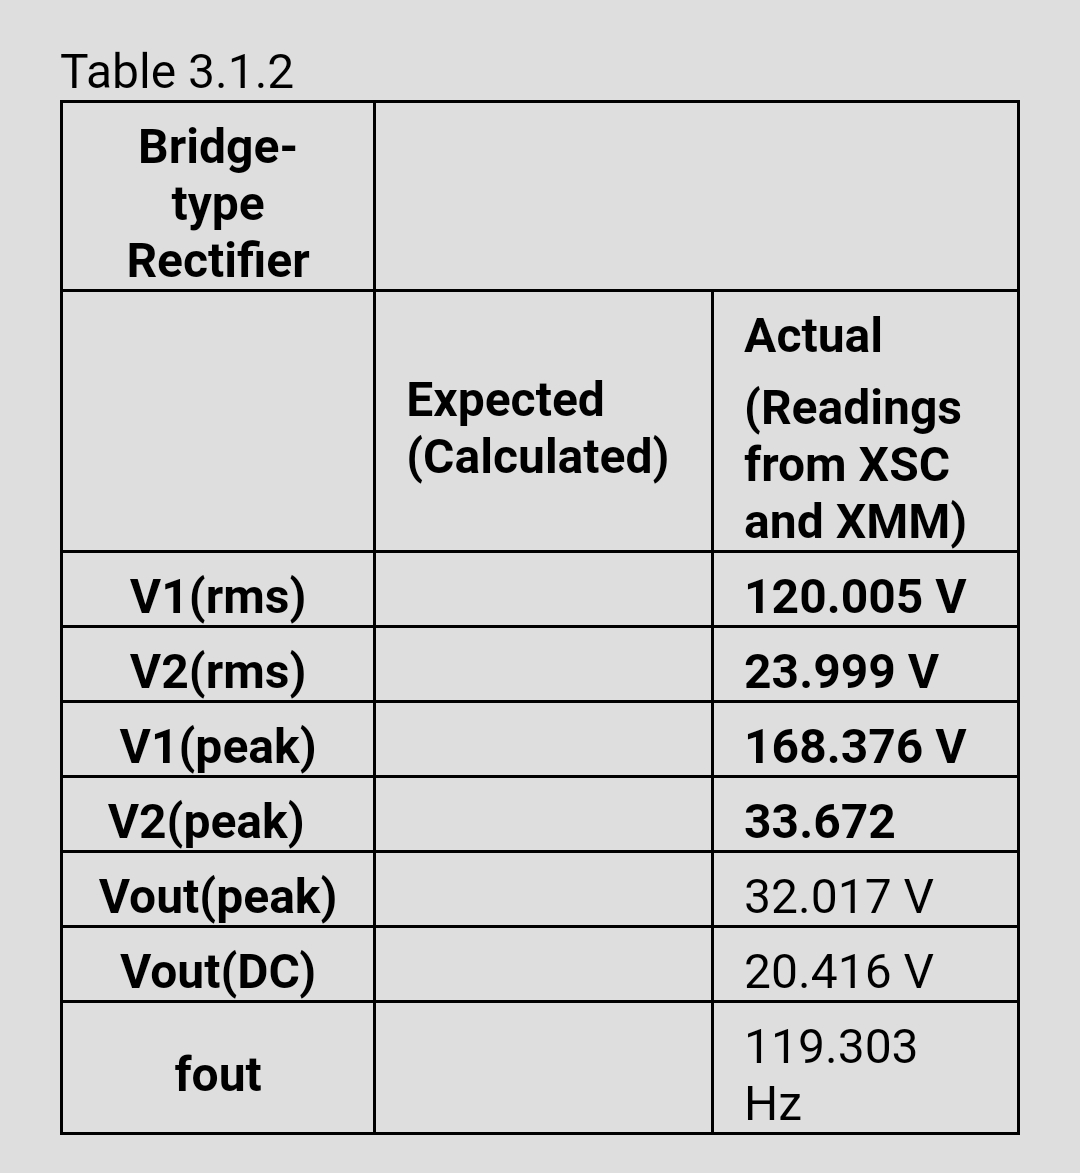 Table 3.1.2
Bridge-
type
Rectifier
Actual
Expected
(Calculated)
(Readings
from XSC
and XMM)
V1(rms)
V2(rms)
V1(peak)
V2(peak)
Vout(peak)
Vout(DC)
120.005 V
23.999 V
168.376 V
33.672
32.017 V
20.416 V
119.303
fout
Hz
